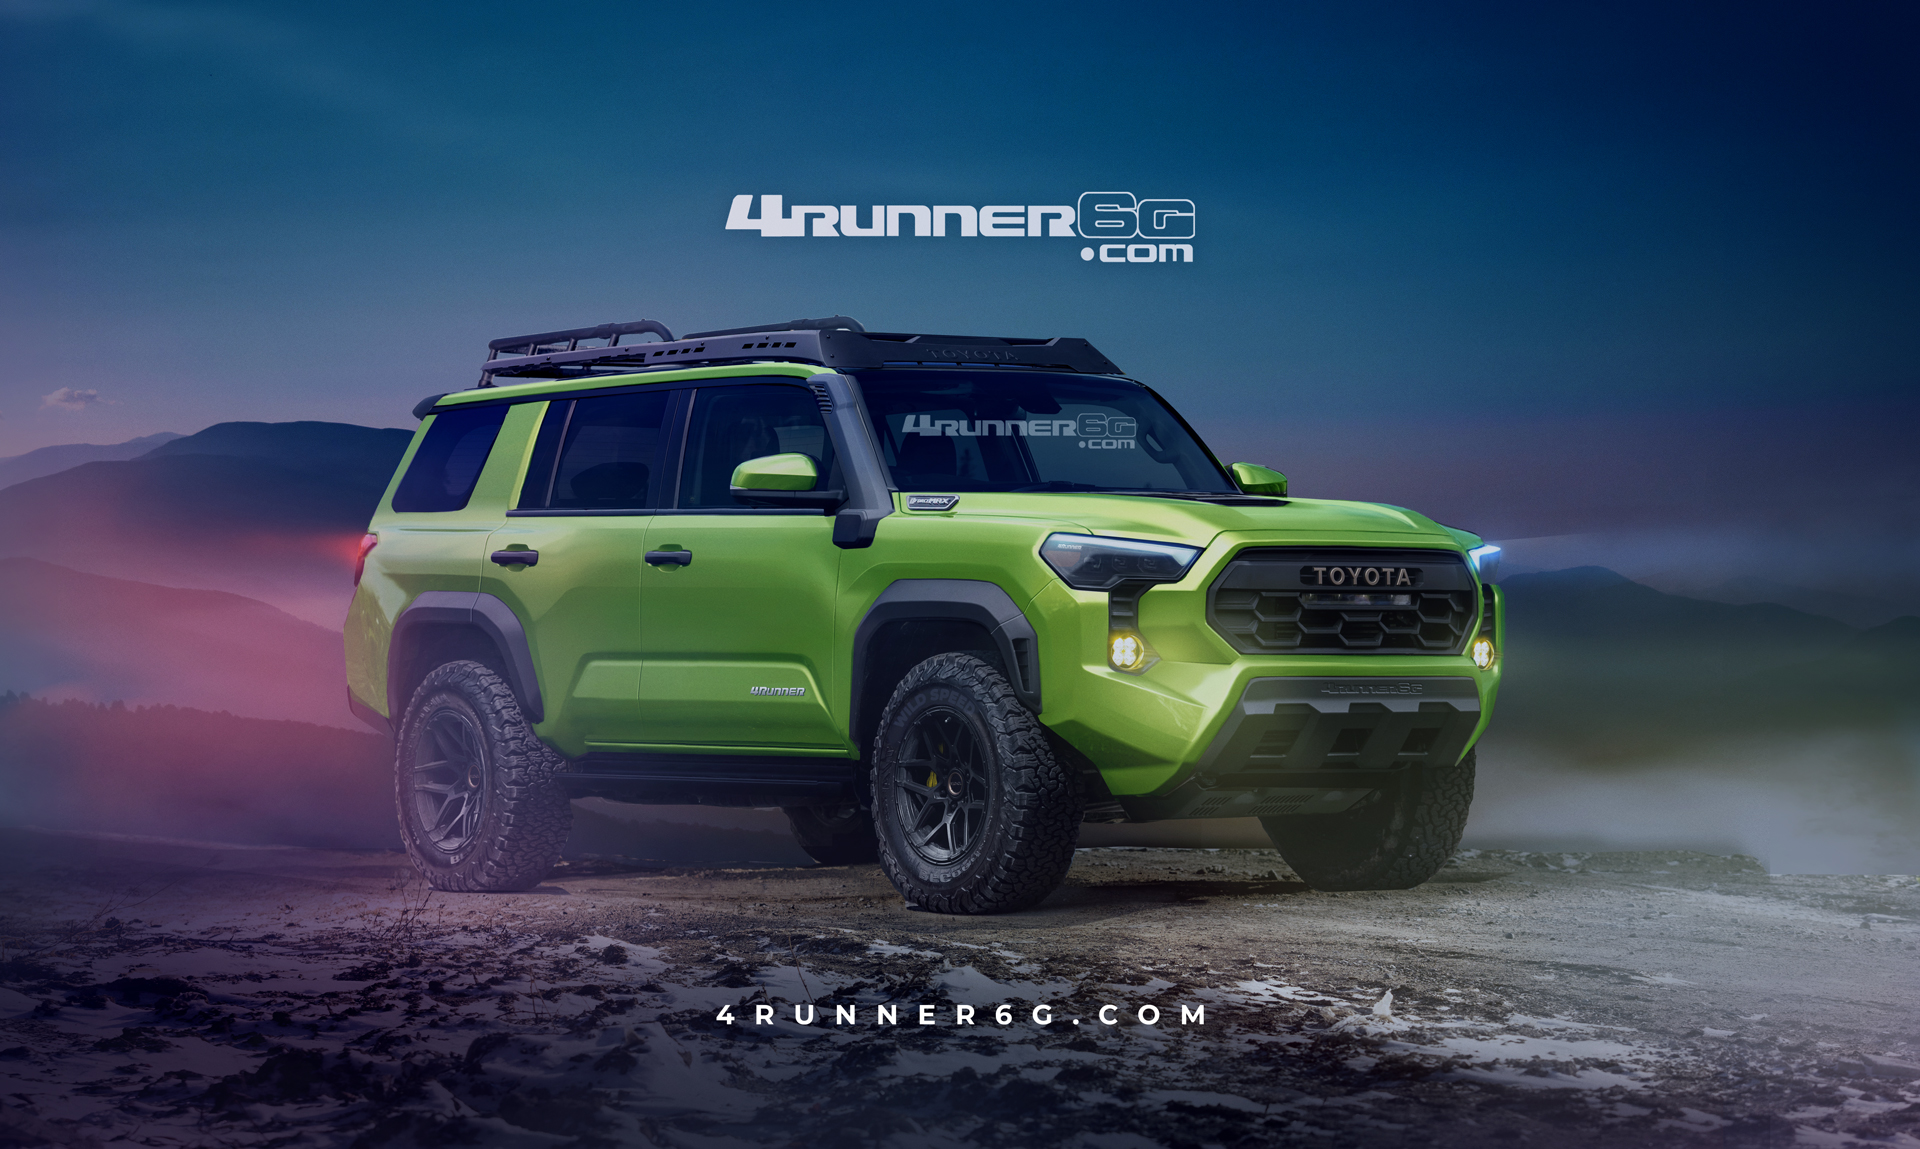 2025 Toyota 4runner 2025 4Runner (6th Gen) News, Specs, Engines, Release Date, Production Date & Preview Renderings -- Insider Info (as of 7/30/23) 2025 Toyota-4Runner-Front-Electric-Lime